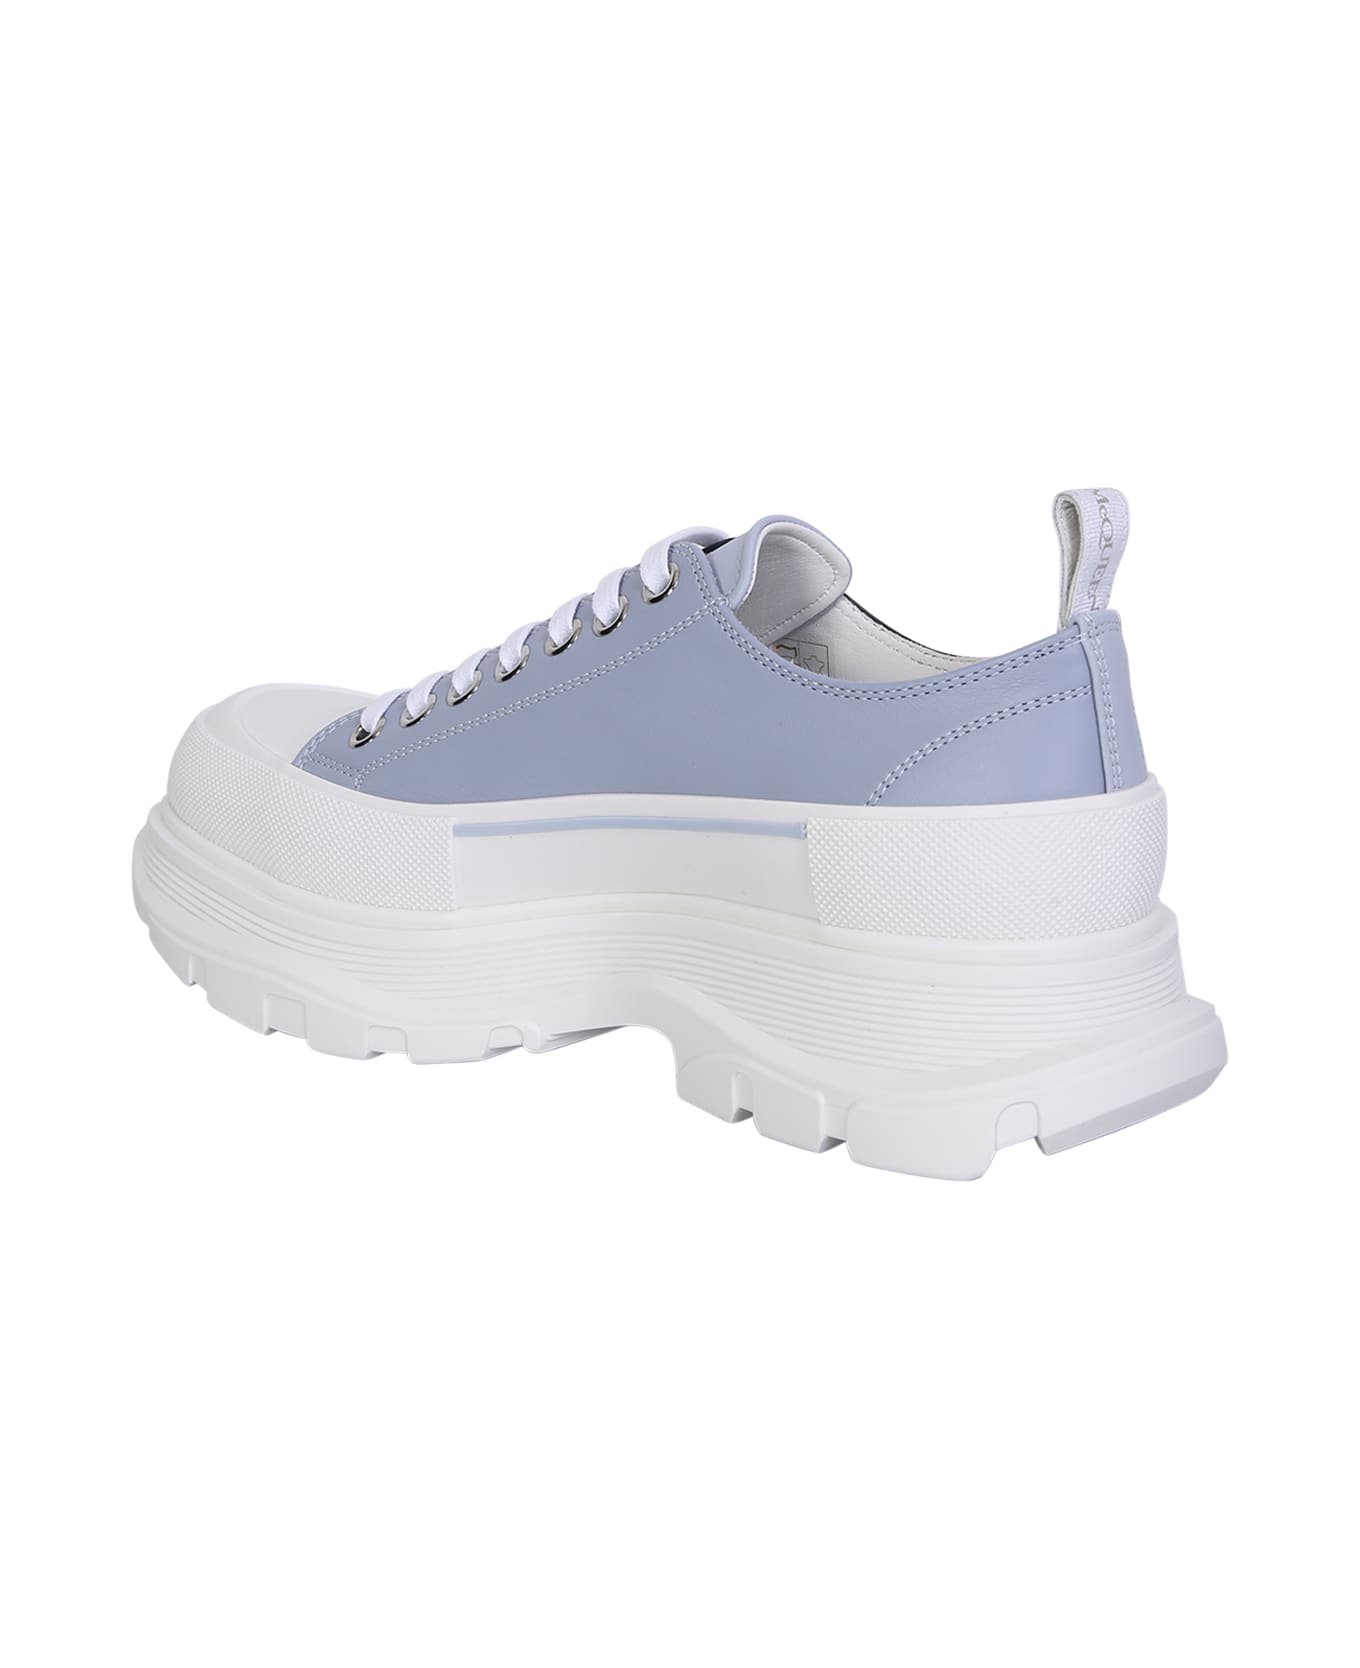 Alexander McQueen Tread Slick Round-toe Lace-up Sneakers - Blue スニーカー